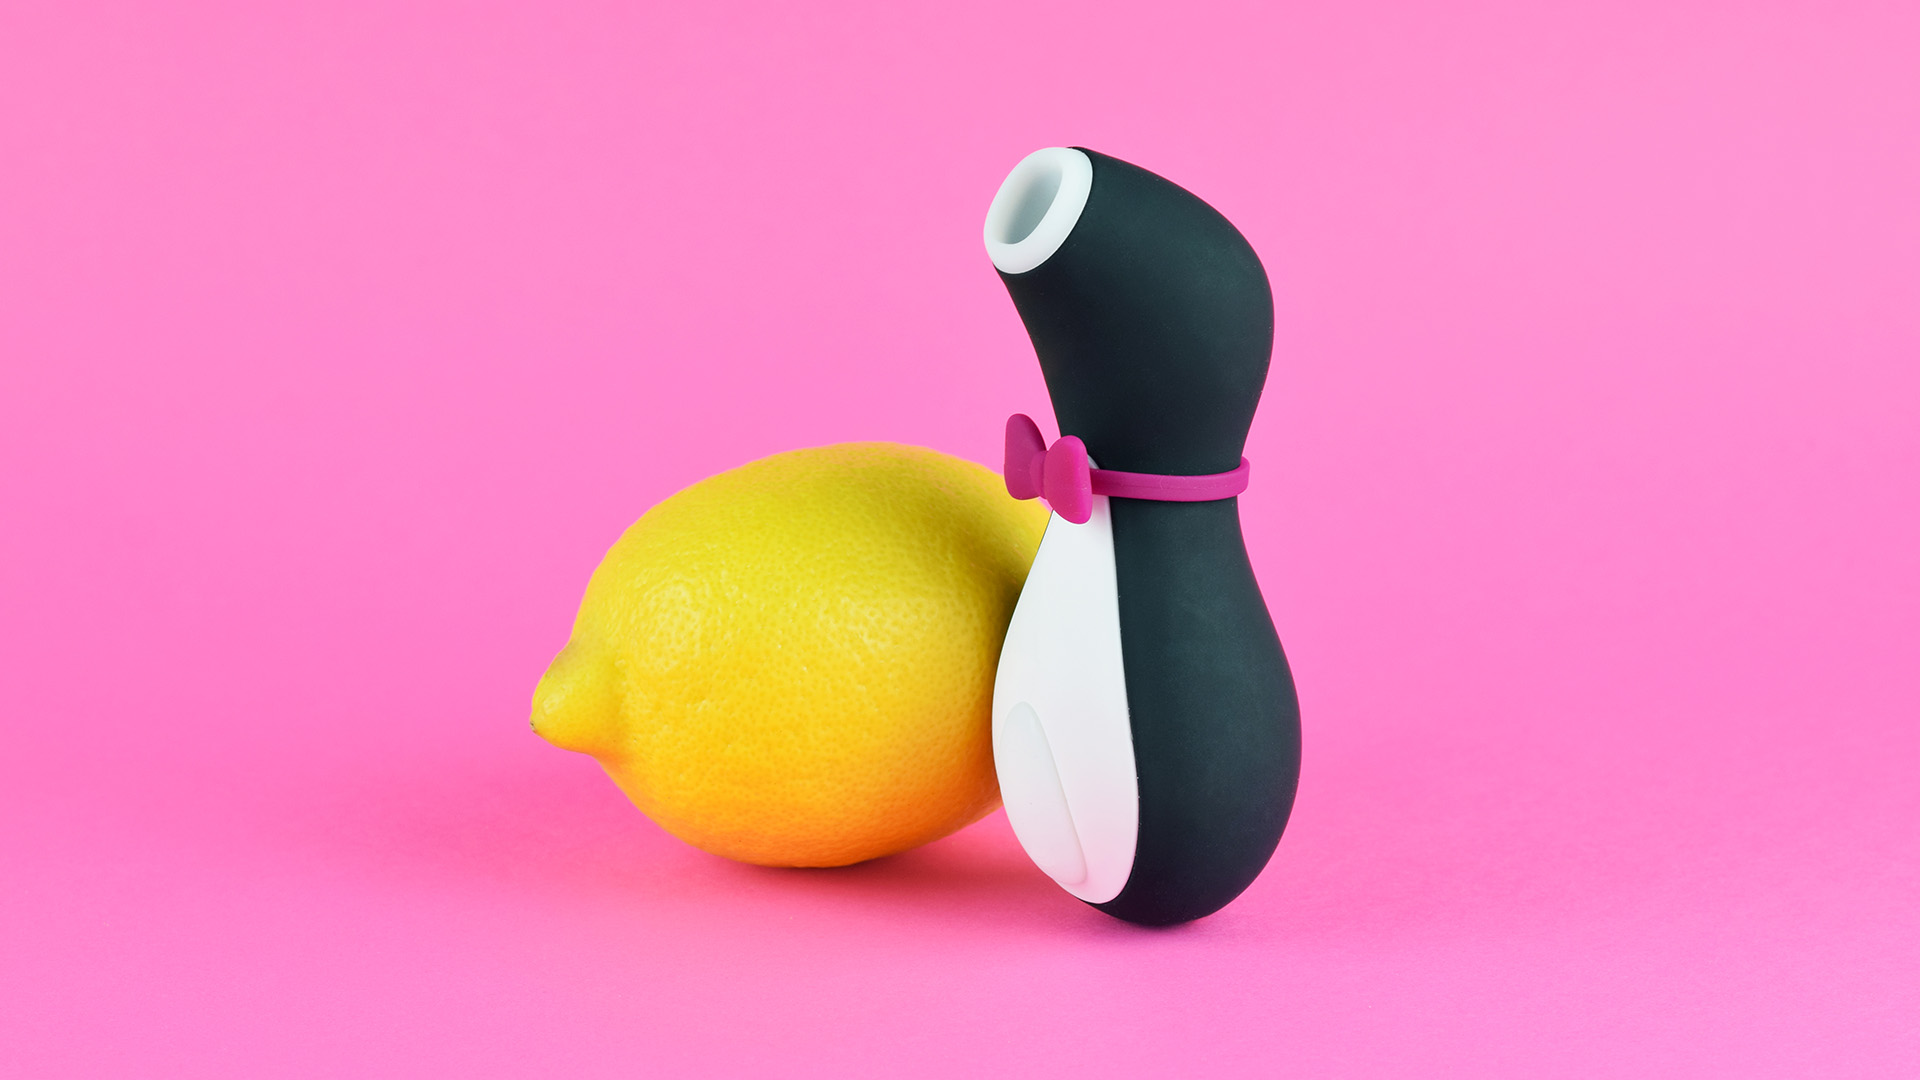 Black vibrator with white tip and button, pink bow around it, next to yellow lemon in front of pink background.